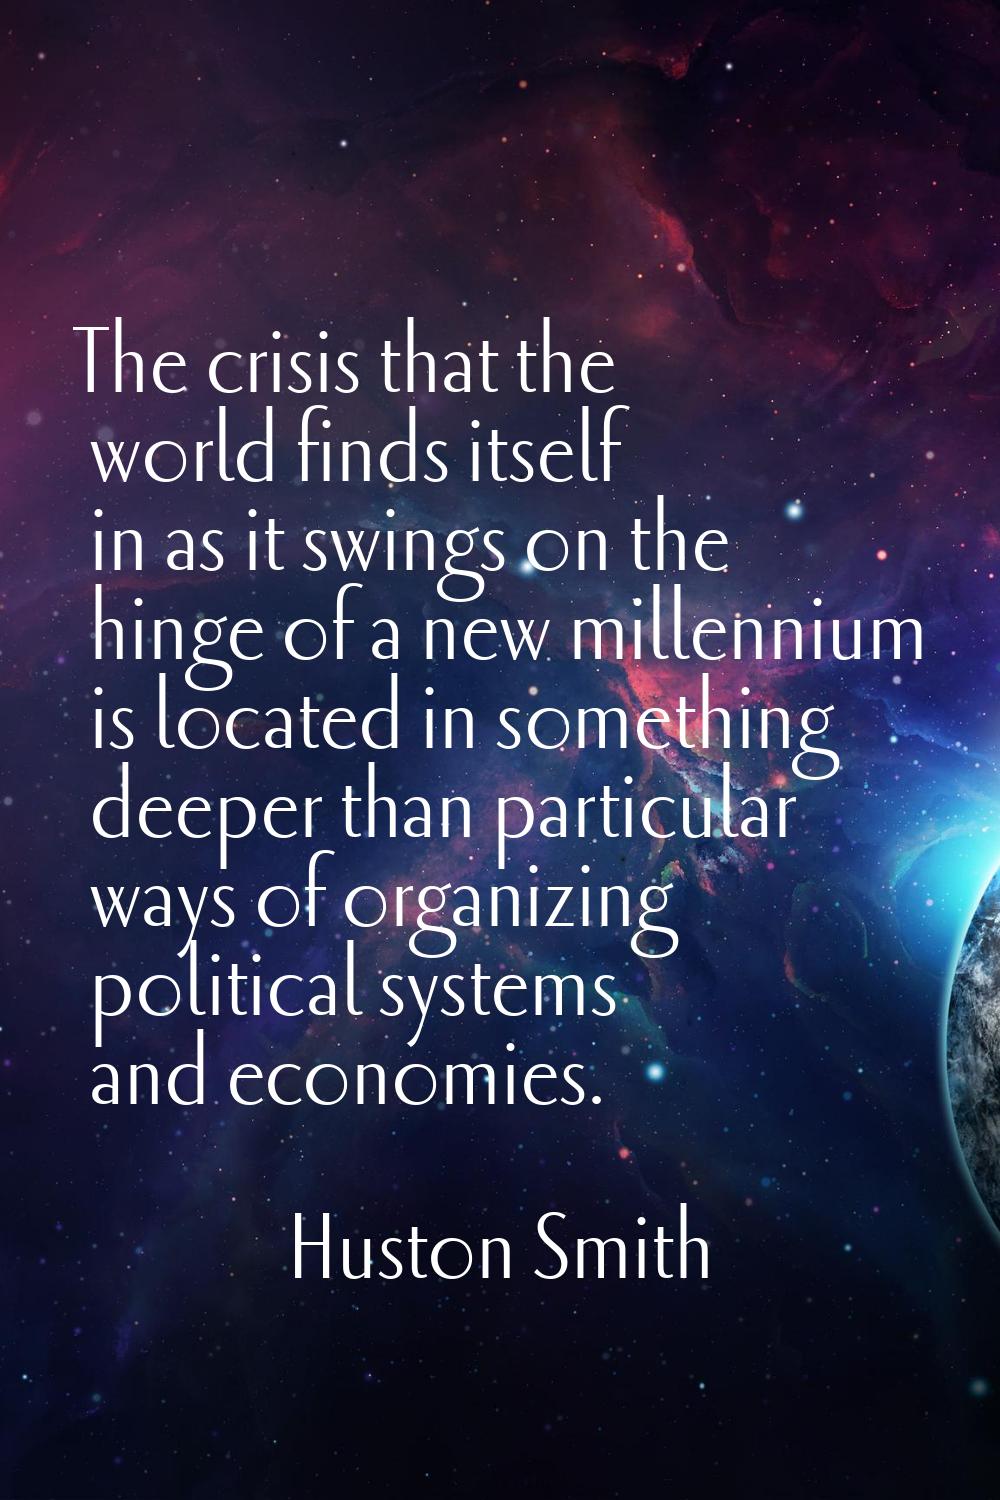 The crisis that the world finds itself in as it swings on the hinge of a new millennium is located 